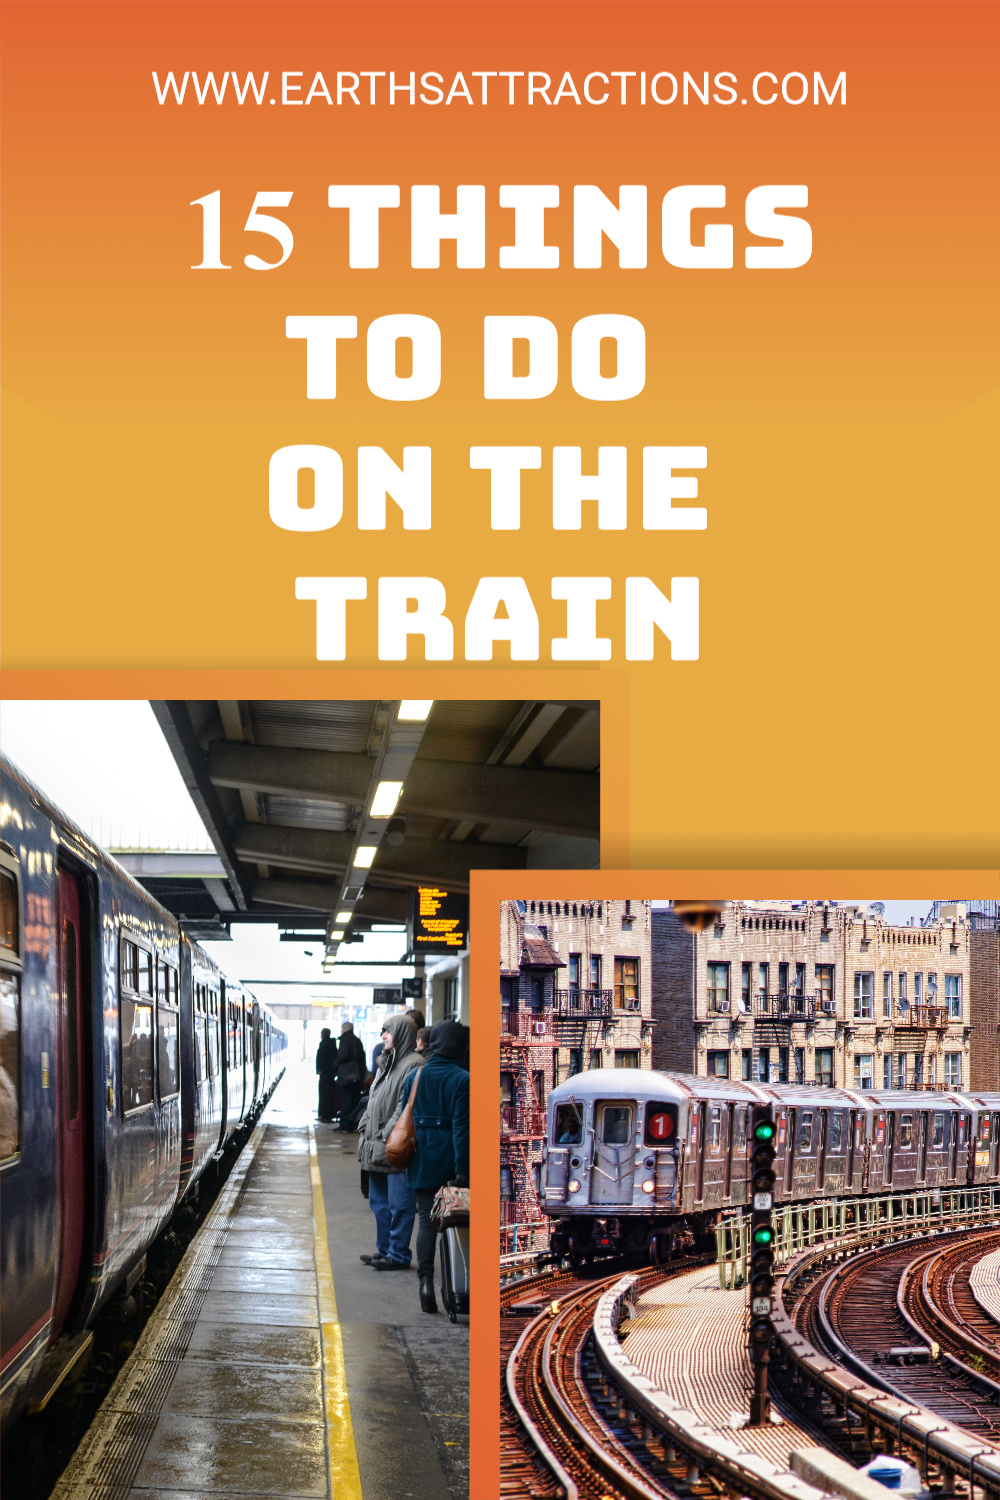 Trip by train: 15 Things to do on the train that you'll love. Discover the best train activities - what to do on long train rides. Train travel tips #traintravel #traintips #trainactivities #traintrip